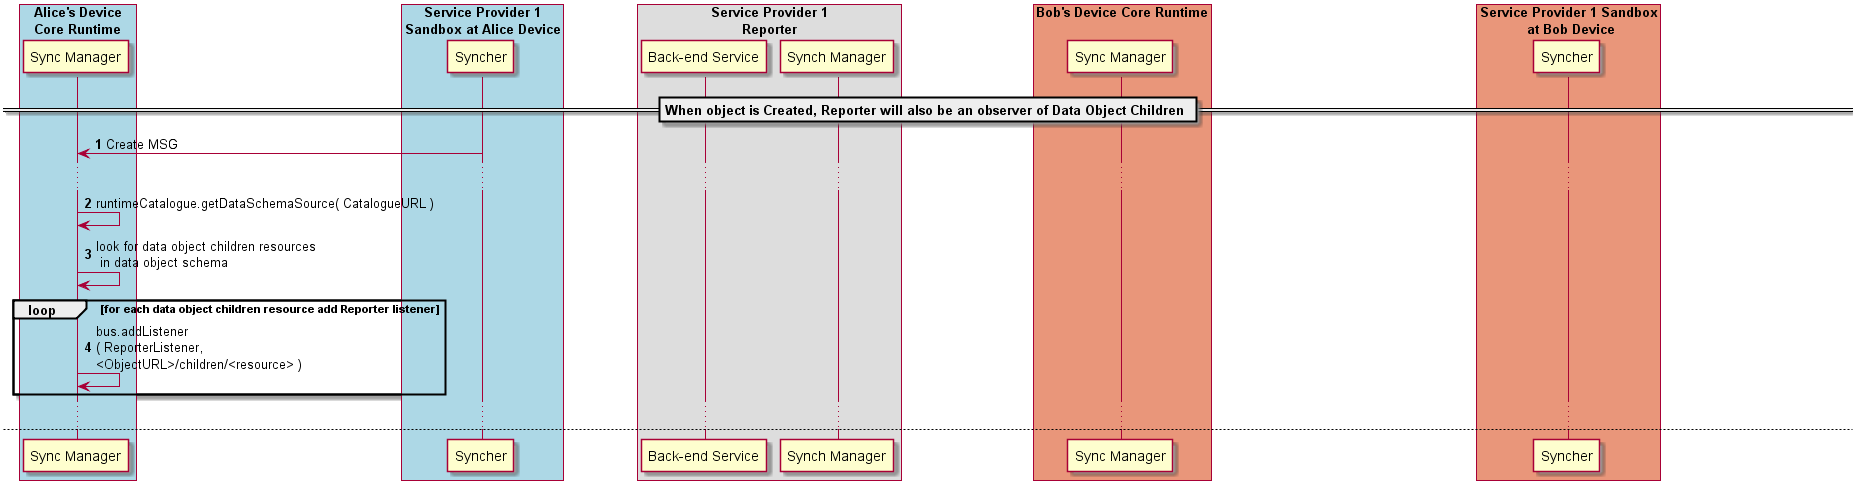 Figure @data-object-parent-create Request to create a Data Object Parent